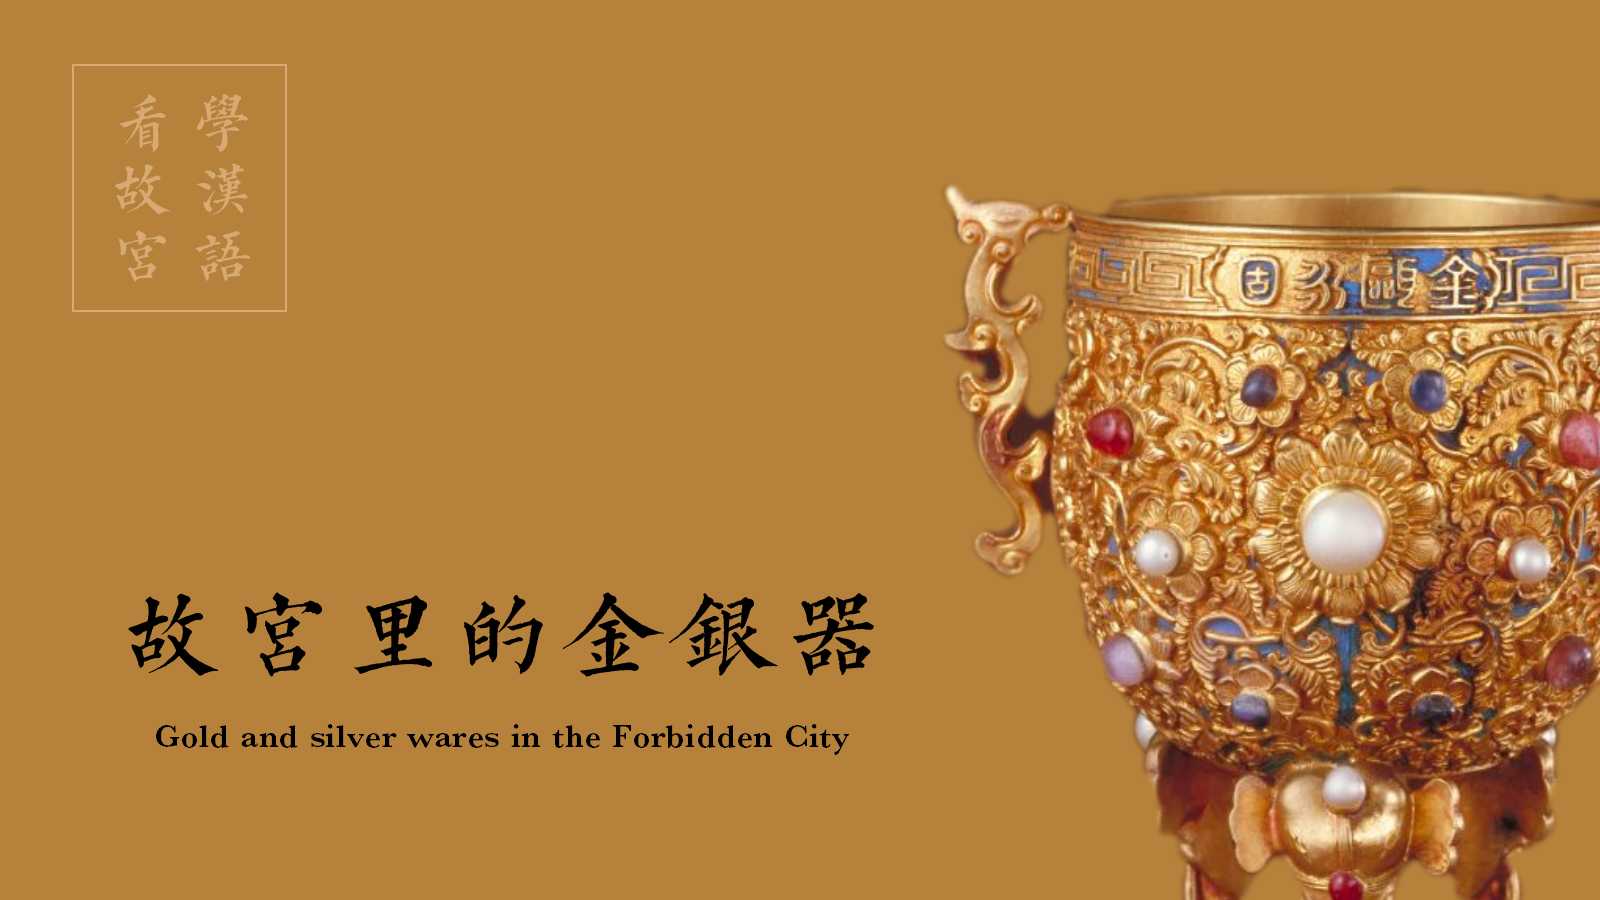 Treasures in the Forbidden City [Episode 04] The Forbidden City’s Gold and Silver